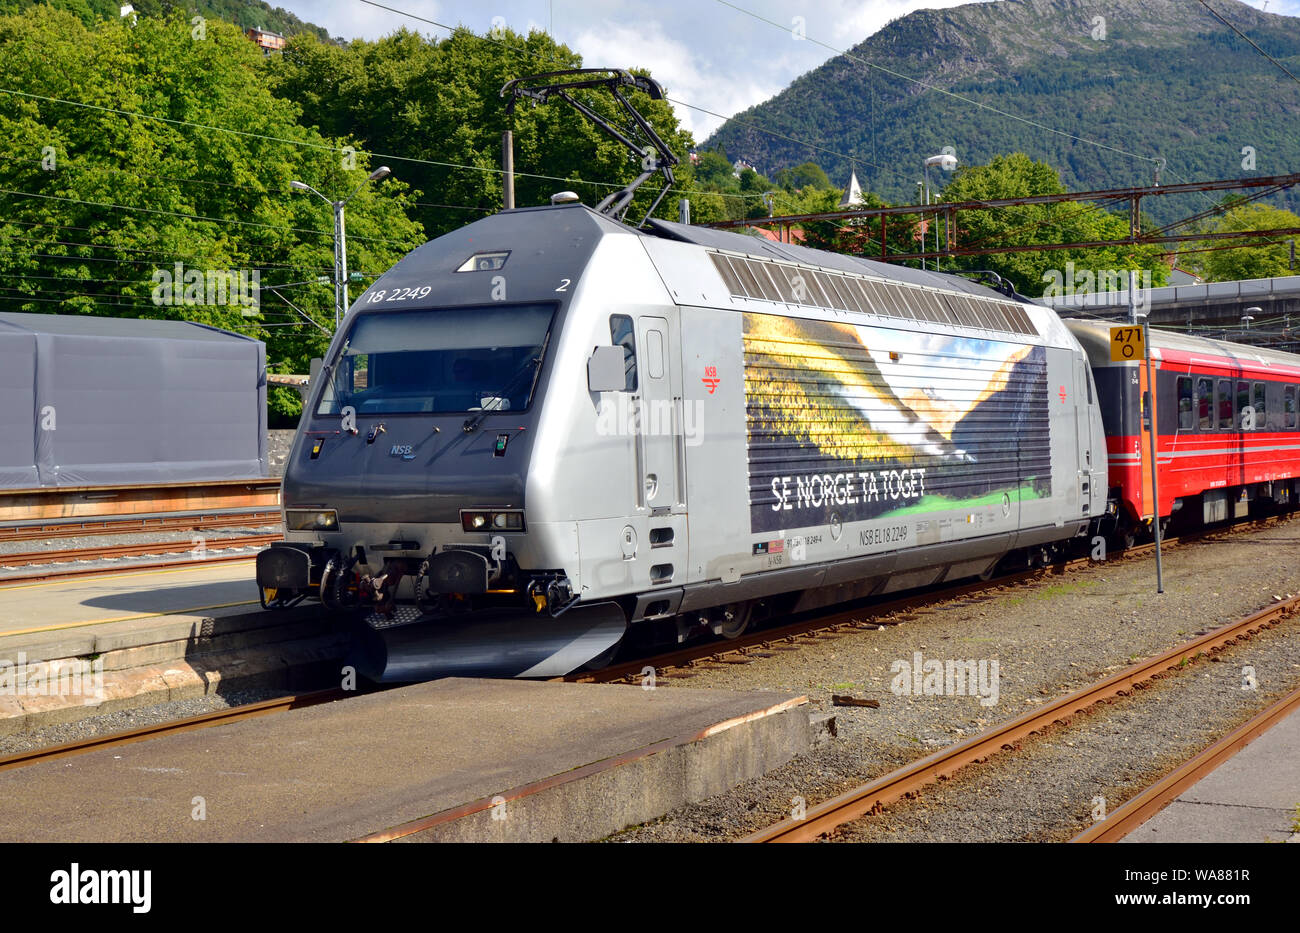 NSB Class EL 18 electric locomotive no. 2249 arrives at Bergen Central Station on a service from Oslo. Stock Photo